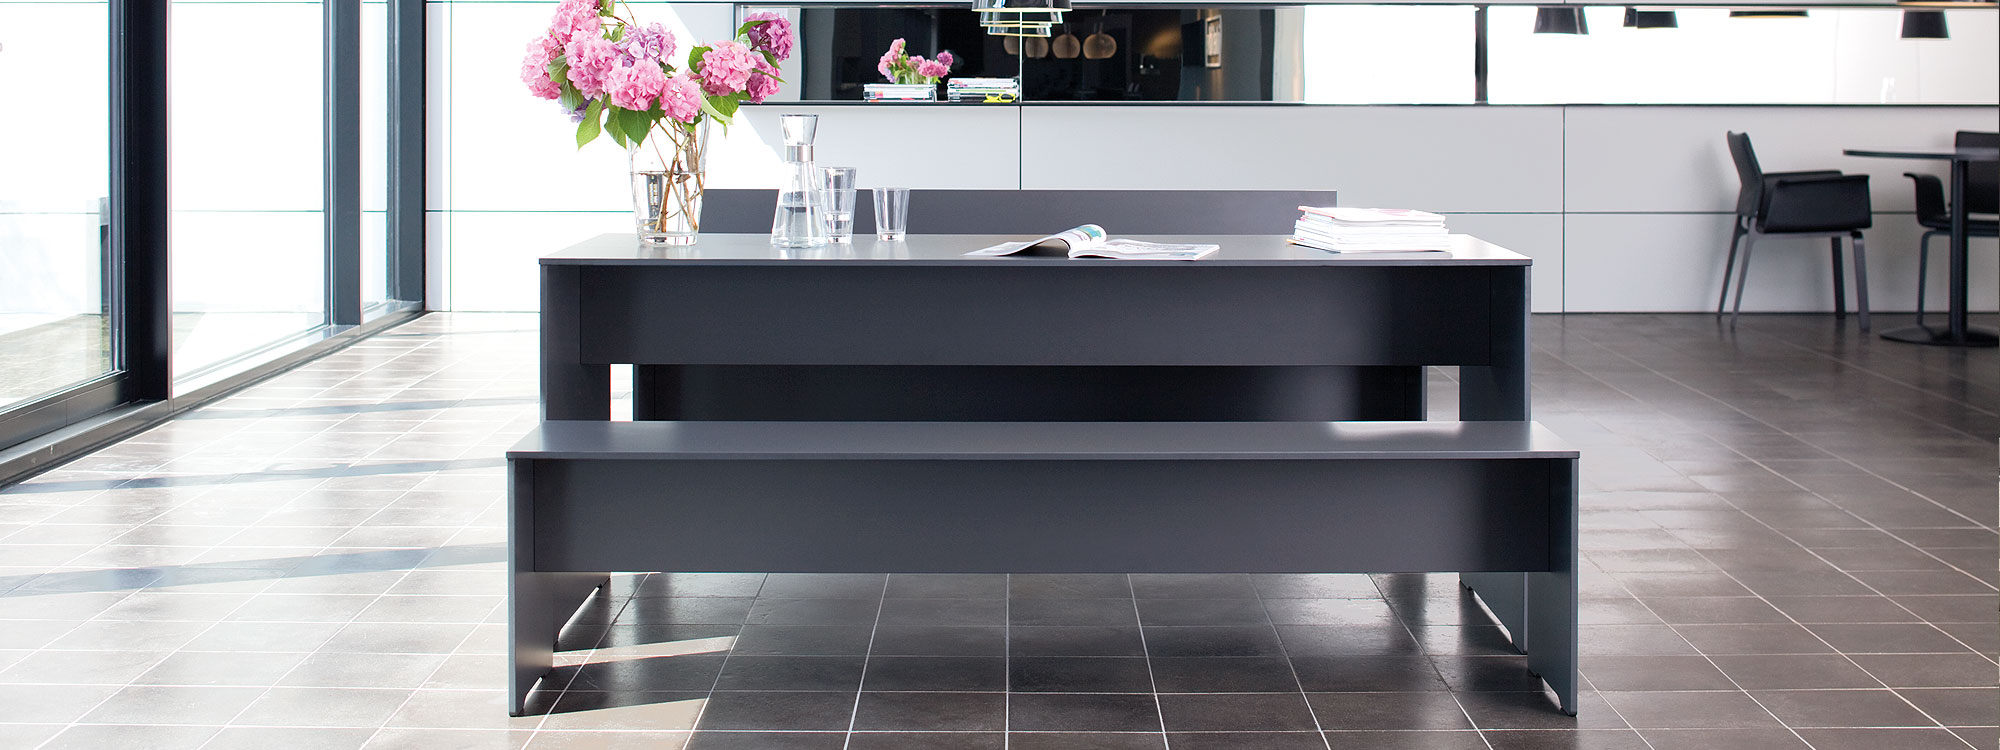 Image of RIVA dark grey table and benches by Conmoto, shown within minimalist house interior